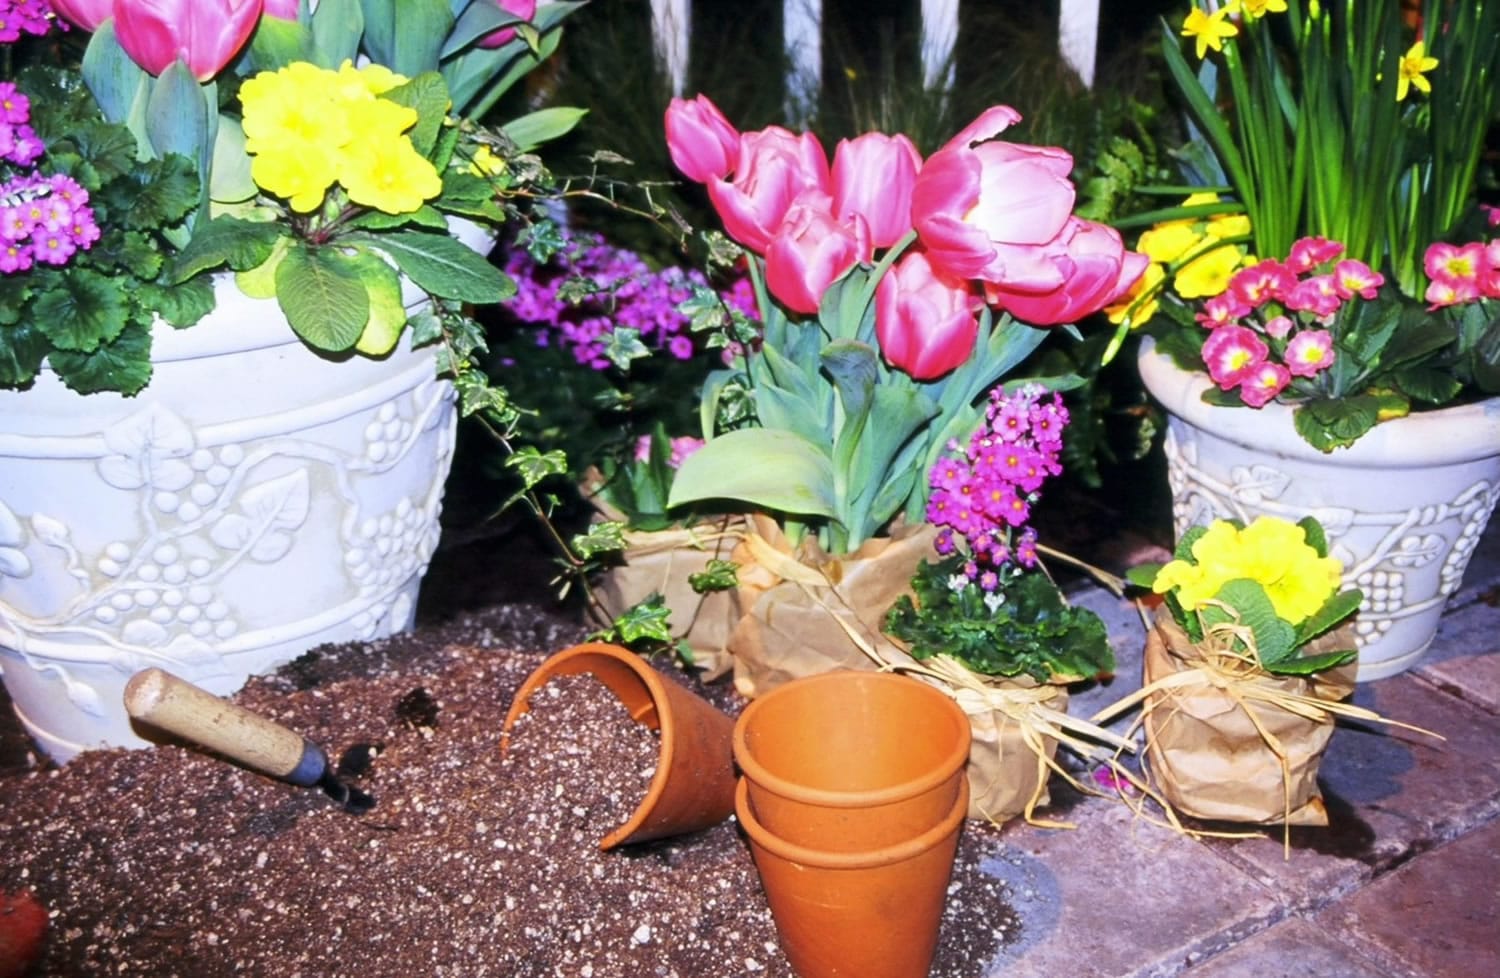 Spring home and garden events are the perfect venue for plant shopping and planting ideas.